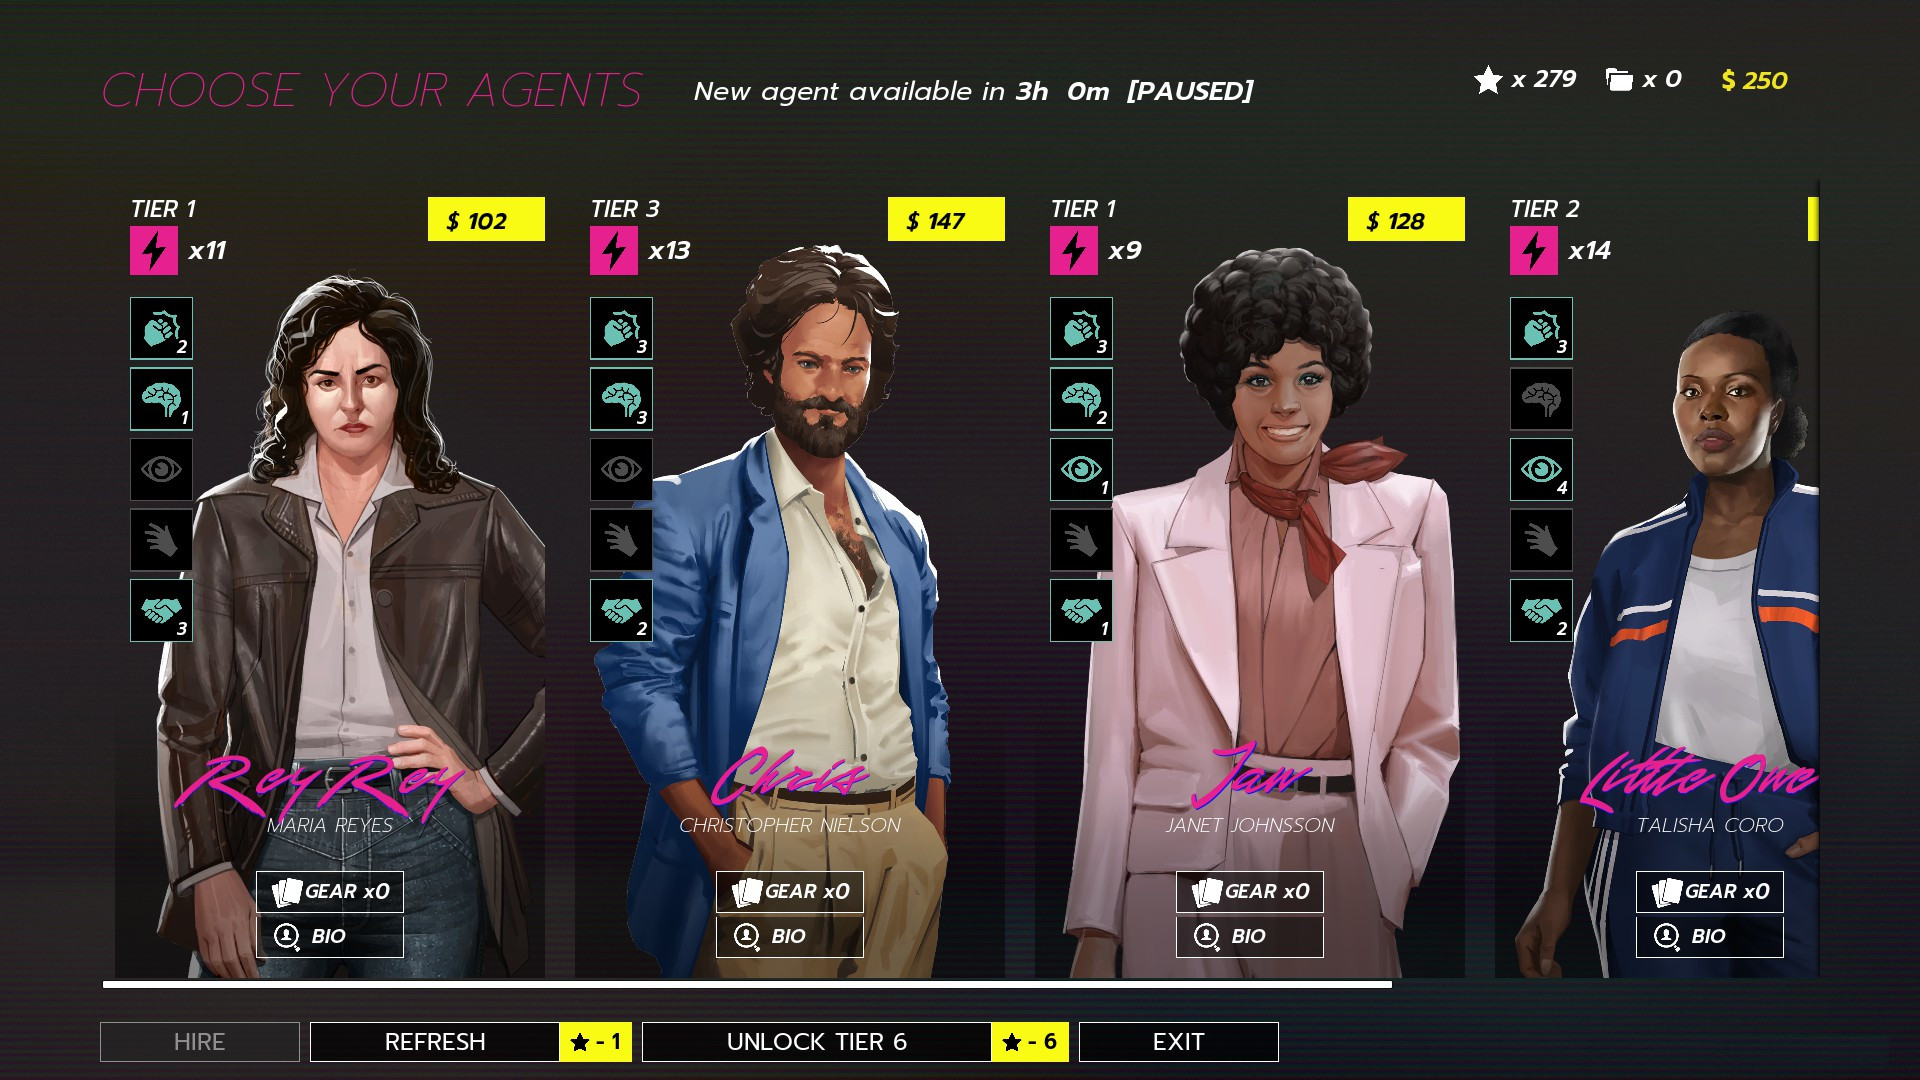 Rough Justice: '84 agents